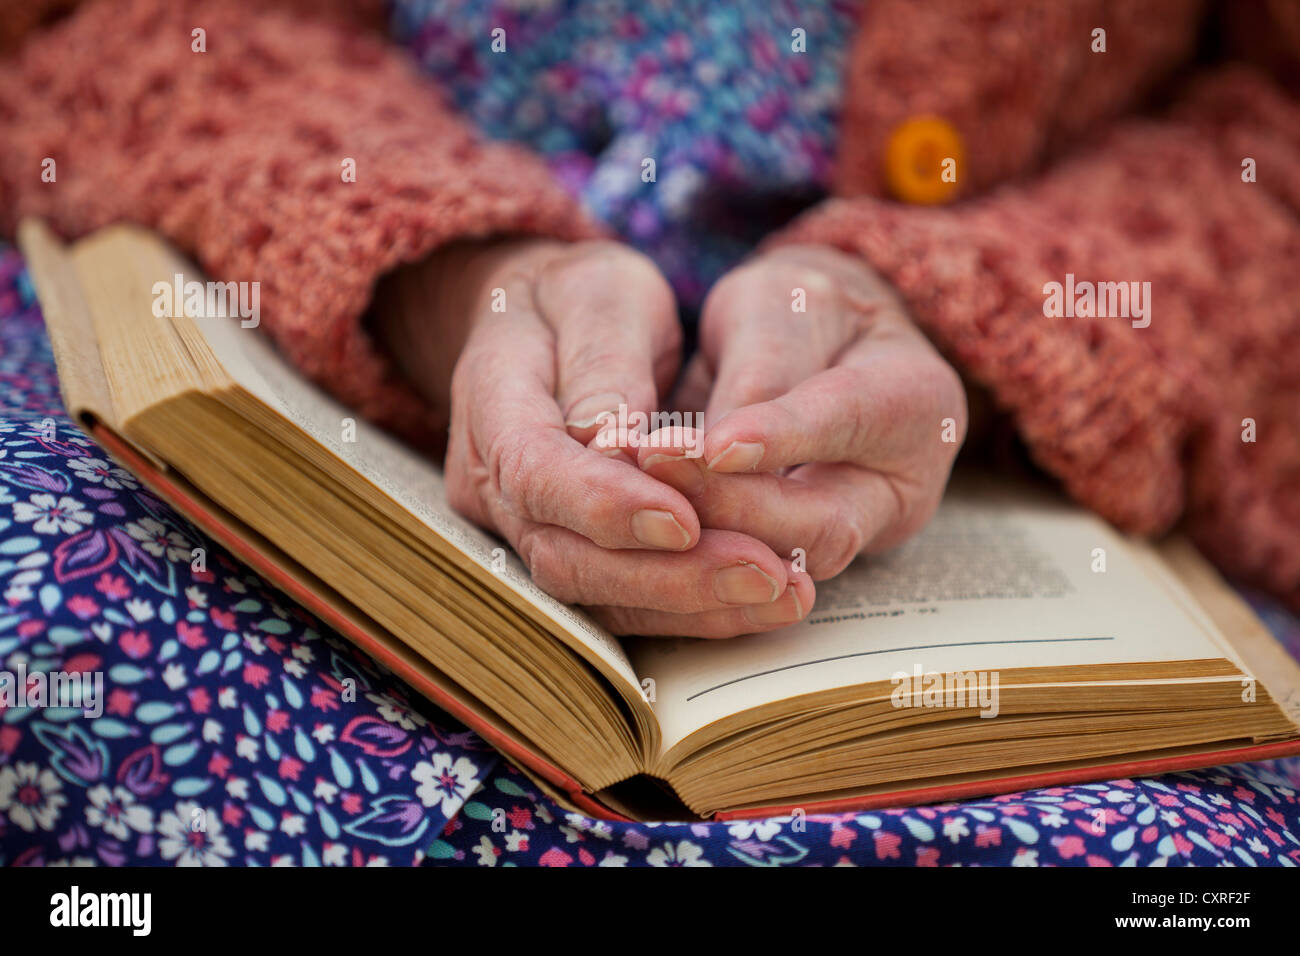 Hands of an old woman lying in her lap on an open book Stock Photo